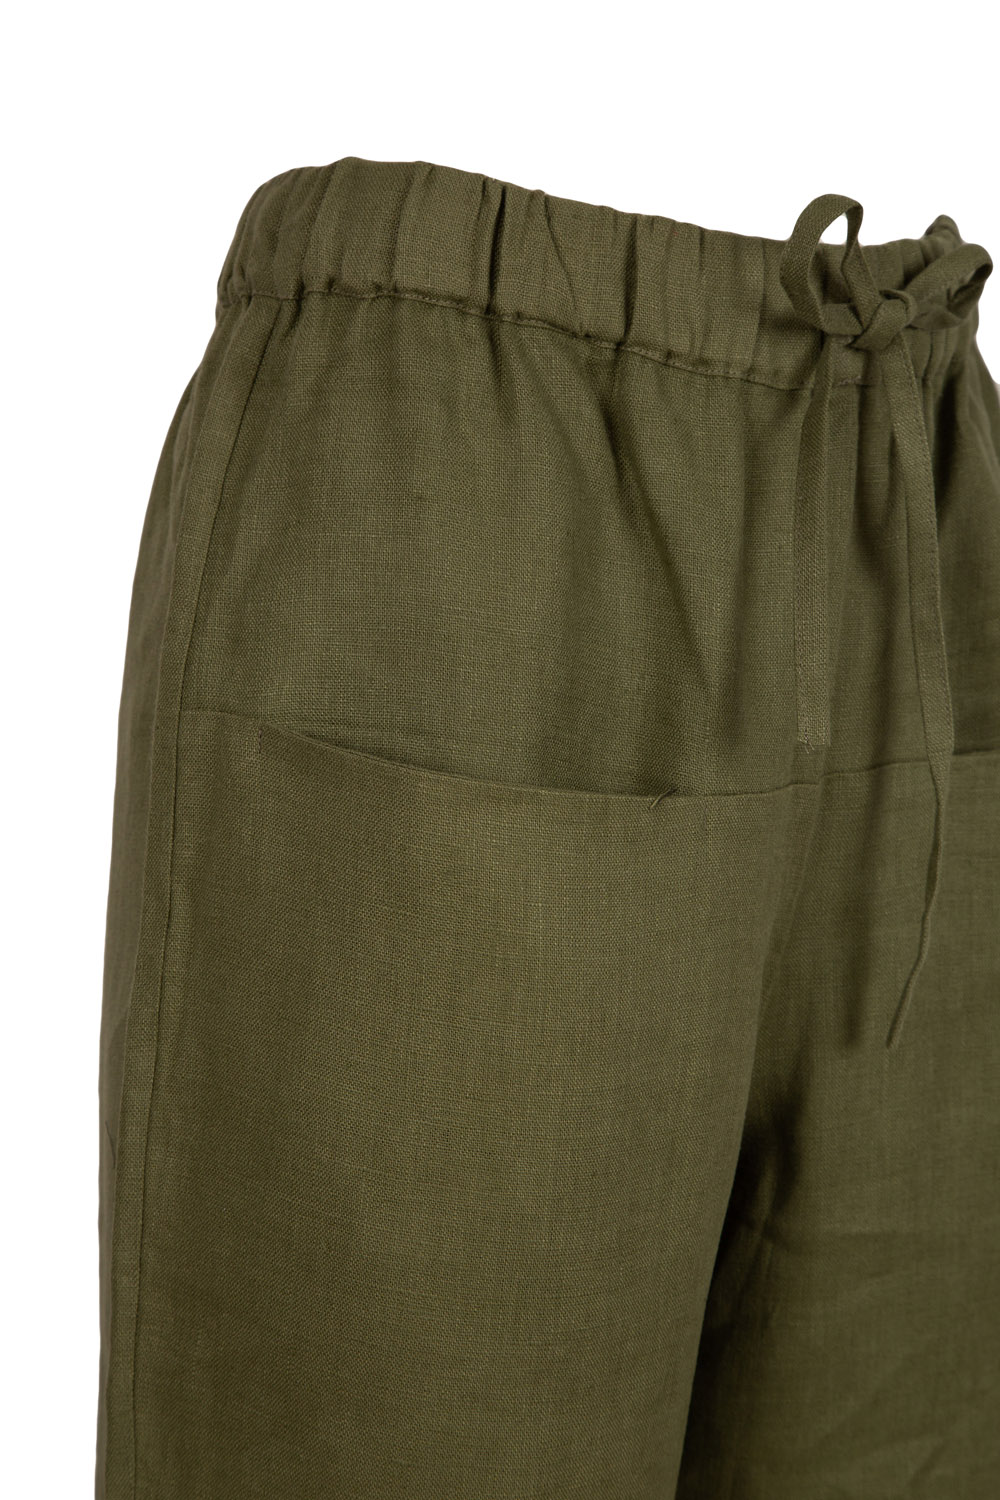 Wide Legged Linen Utility Trousers with Elasticated Tying Waist